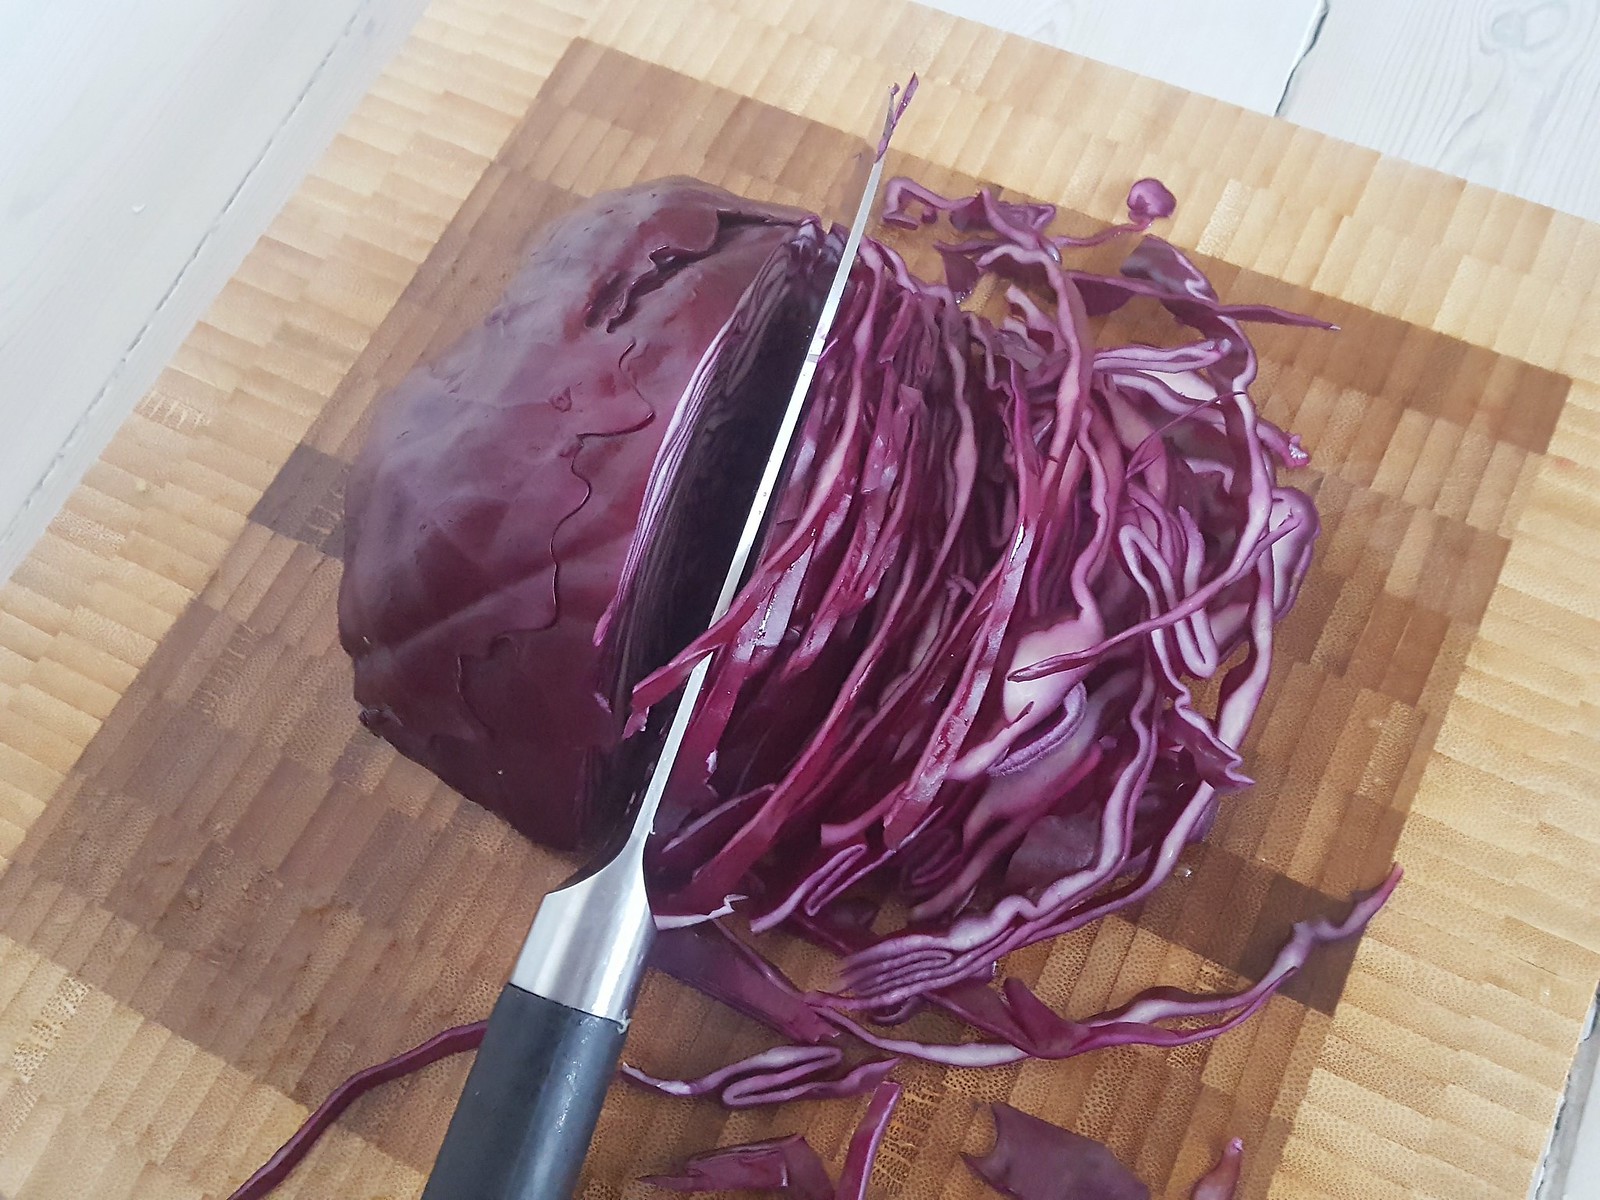 Recipe for Homemade Red Cabbage, Orange and Apple Salad